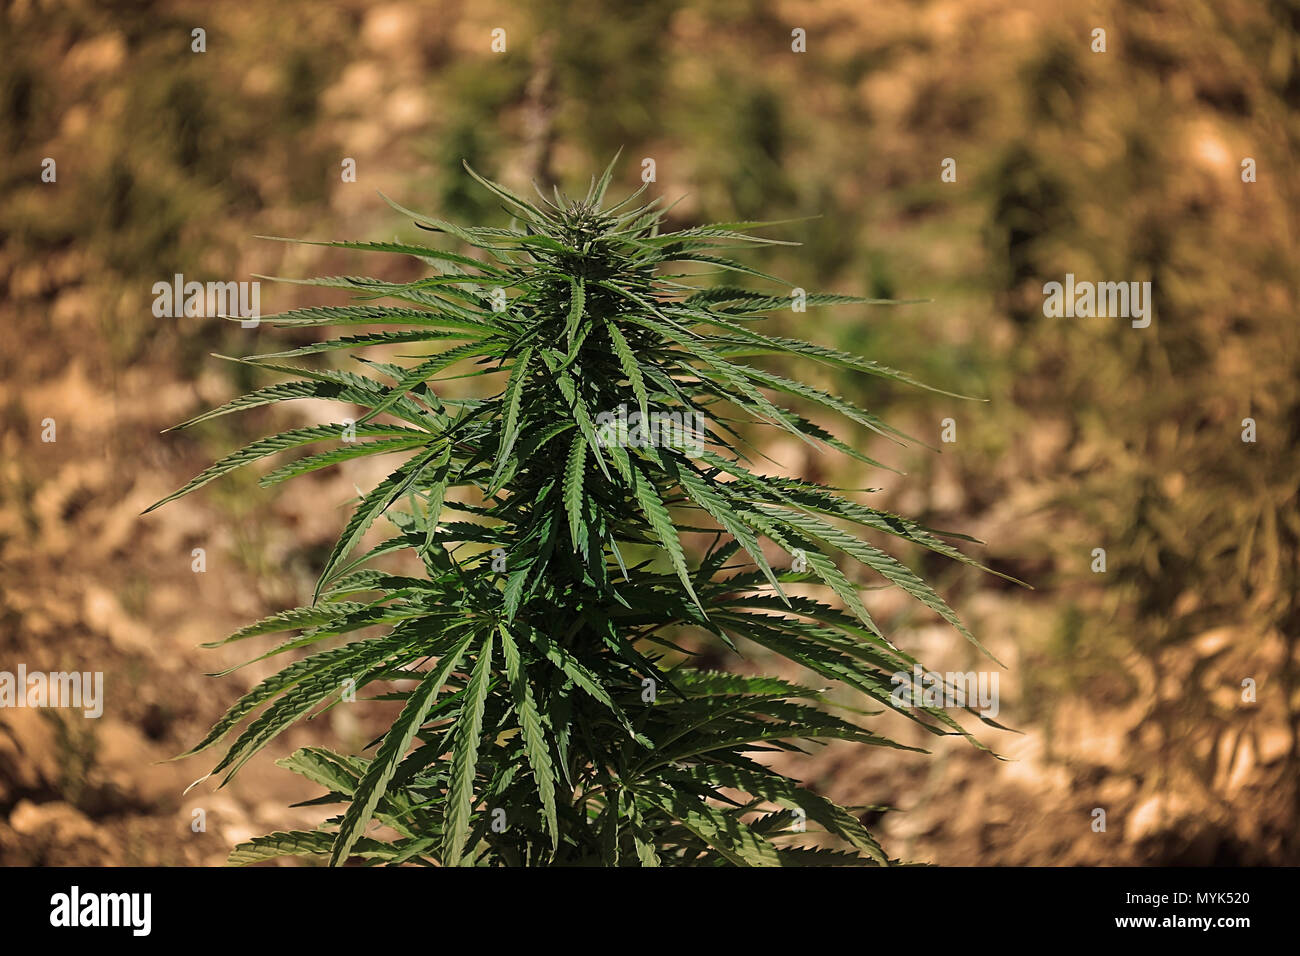 Close-up of a Cannabis Sativa plant growing in a field in Lebanon. Lebanon is one of the top five producers in the world although cannabis is illegal. Stock Photo